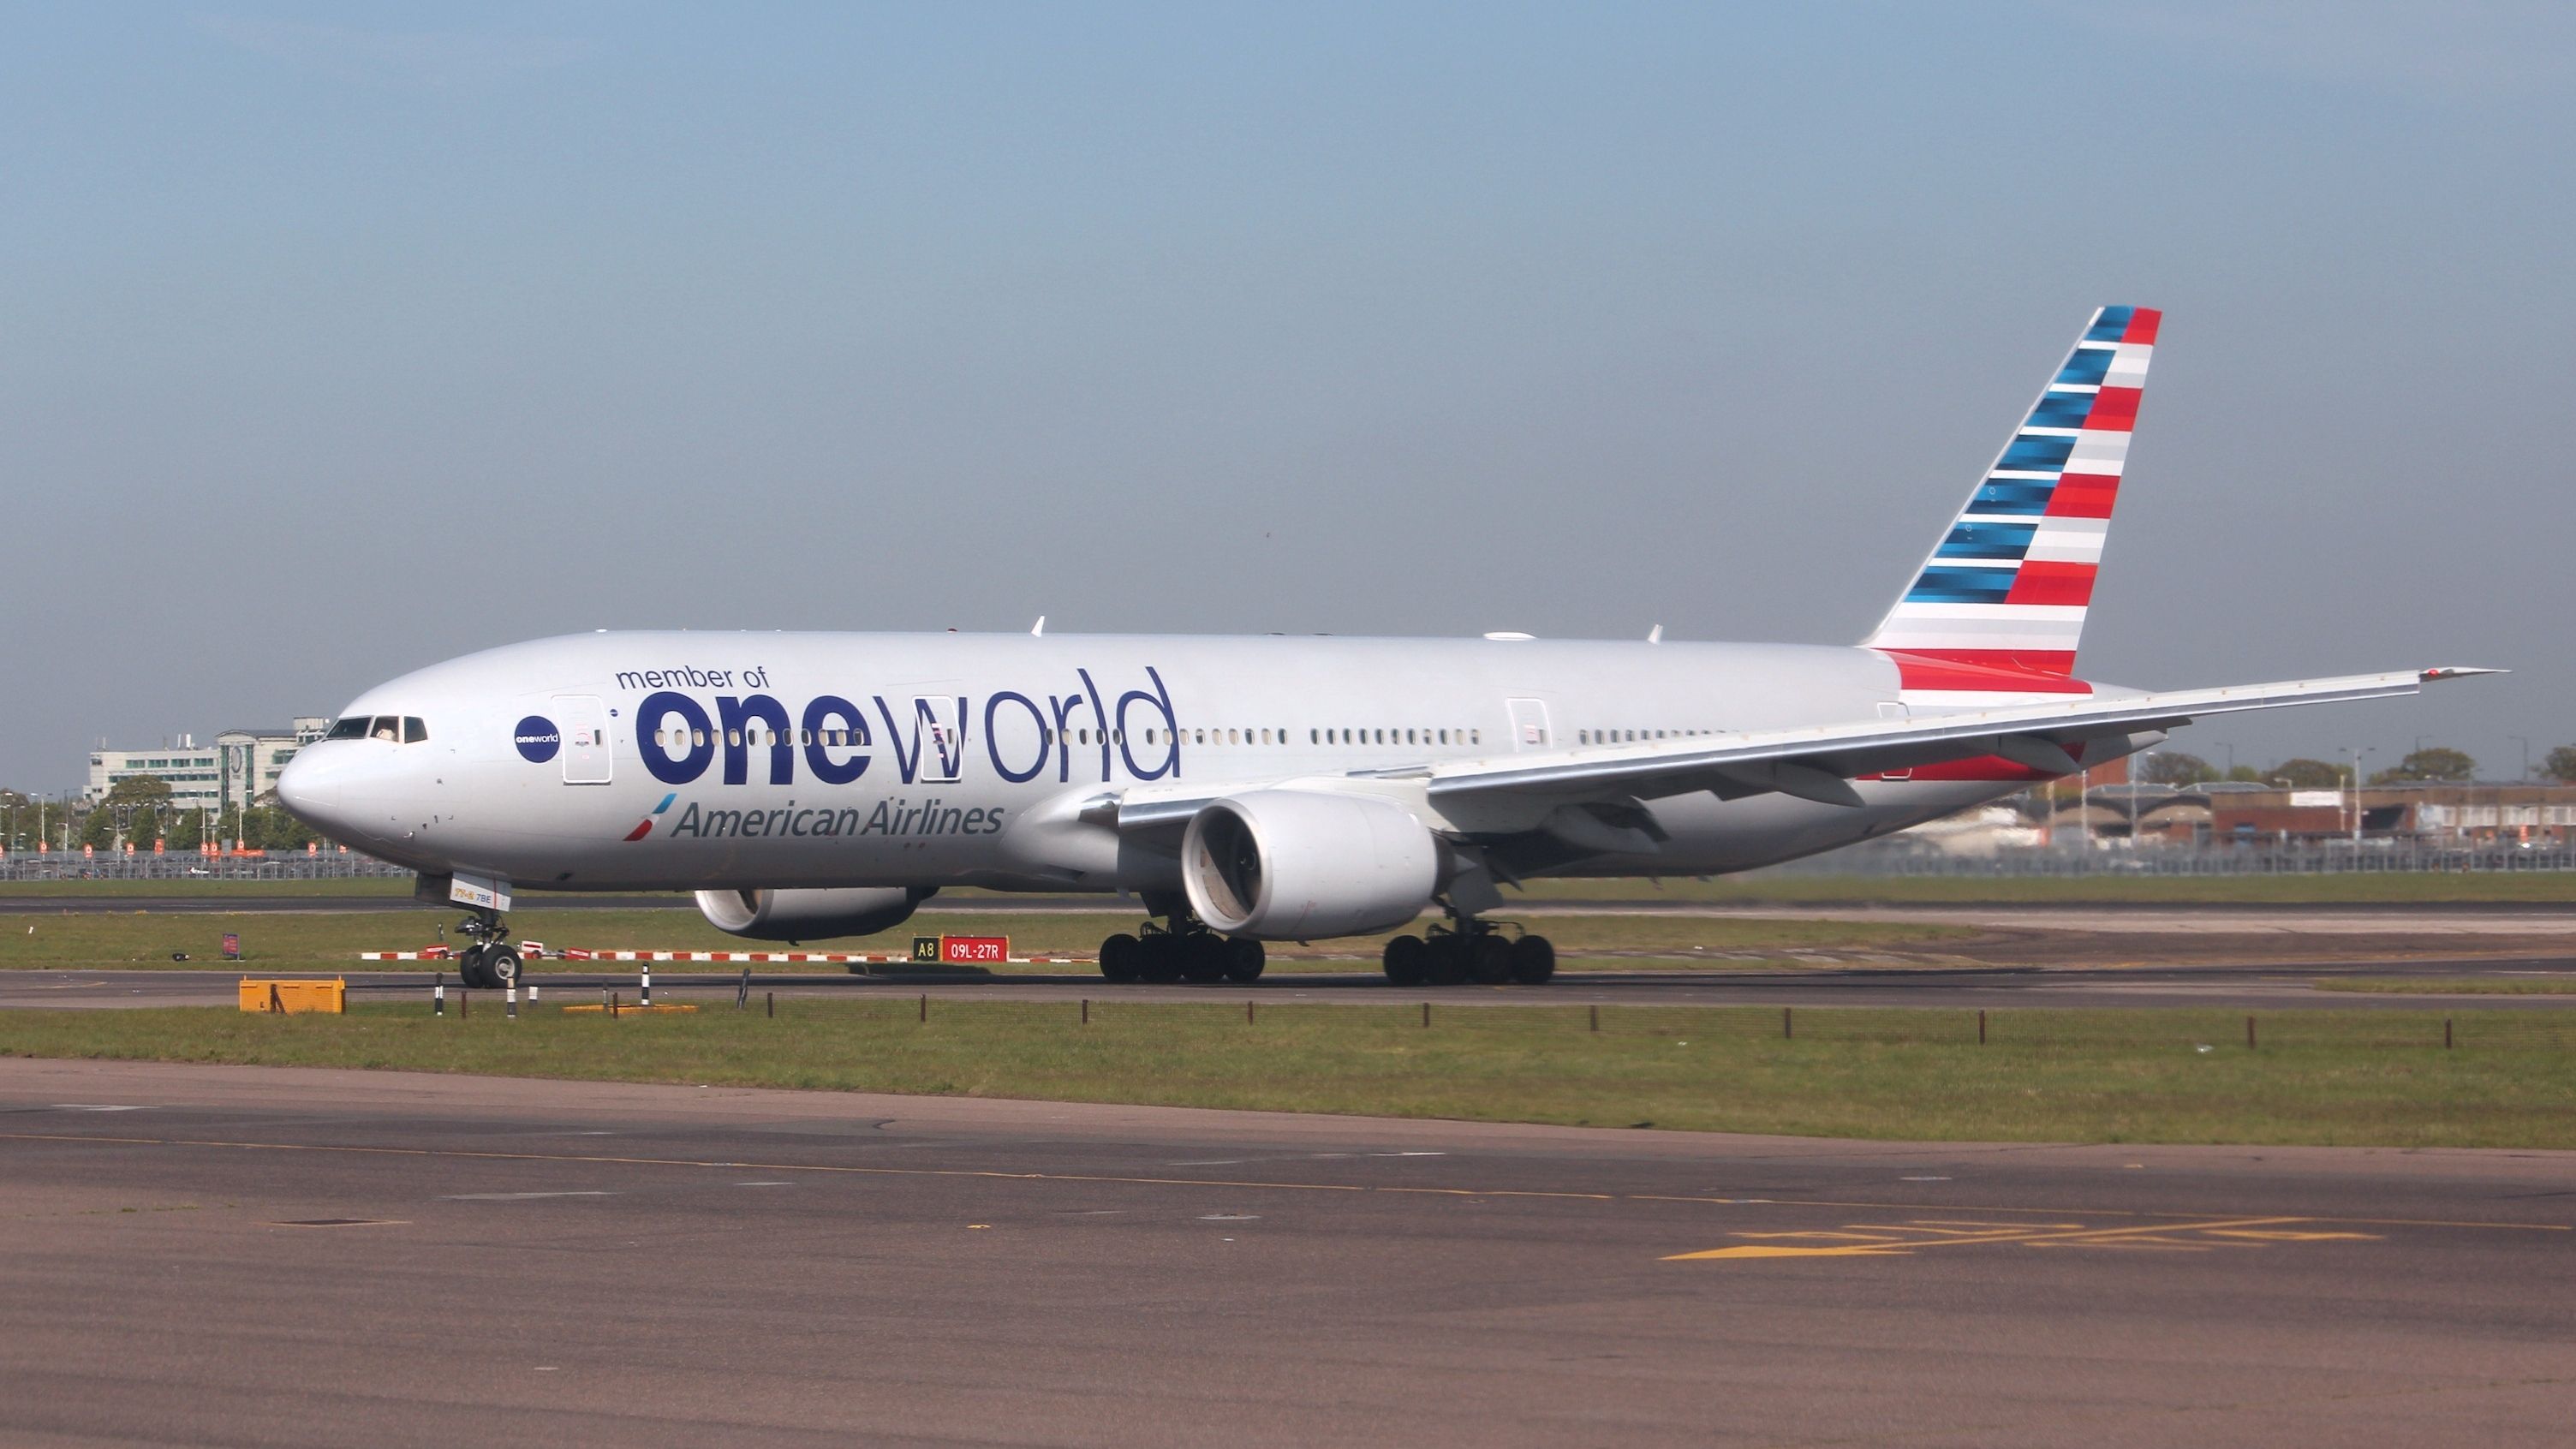 An American Airlines Boeing 777 in oneworld alliance livery on the apron at London Heathrow Airport.